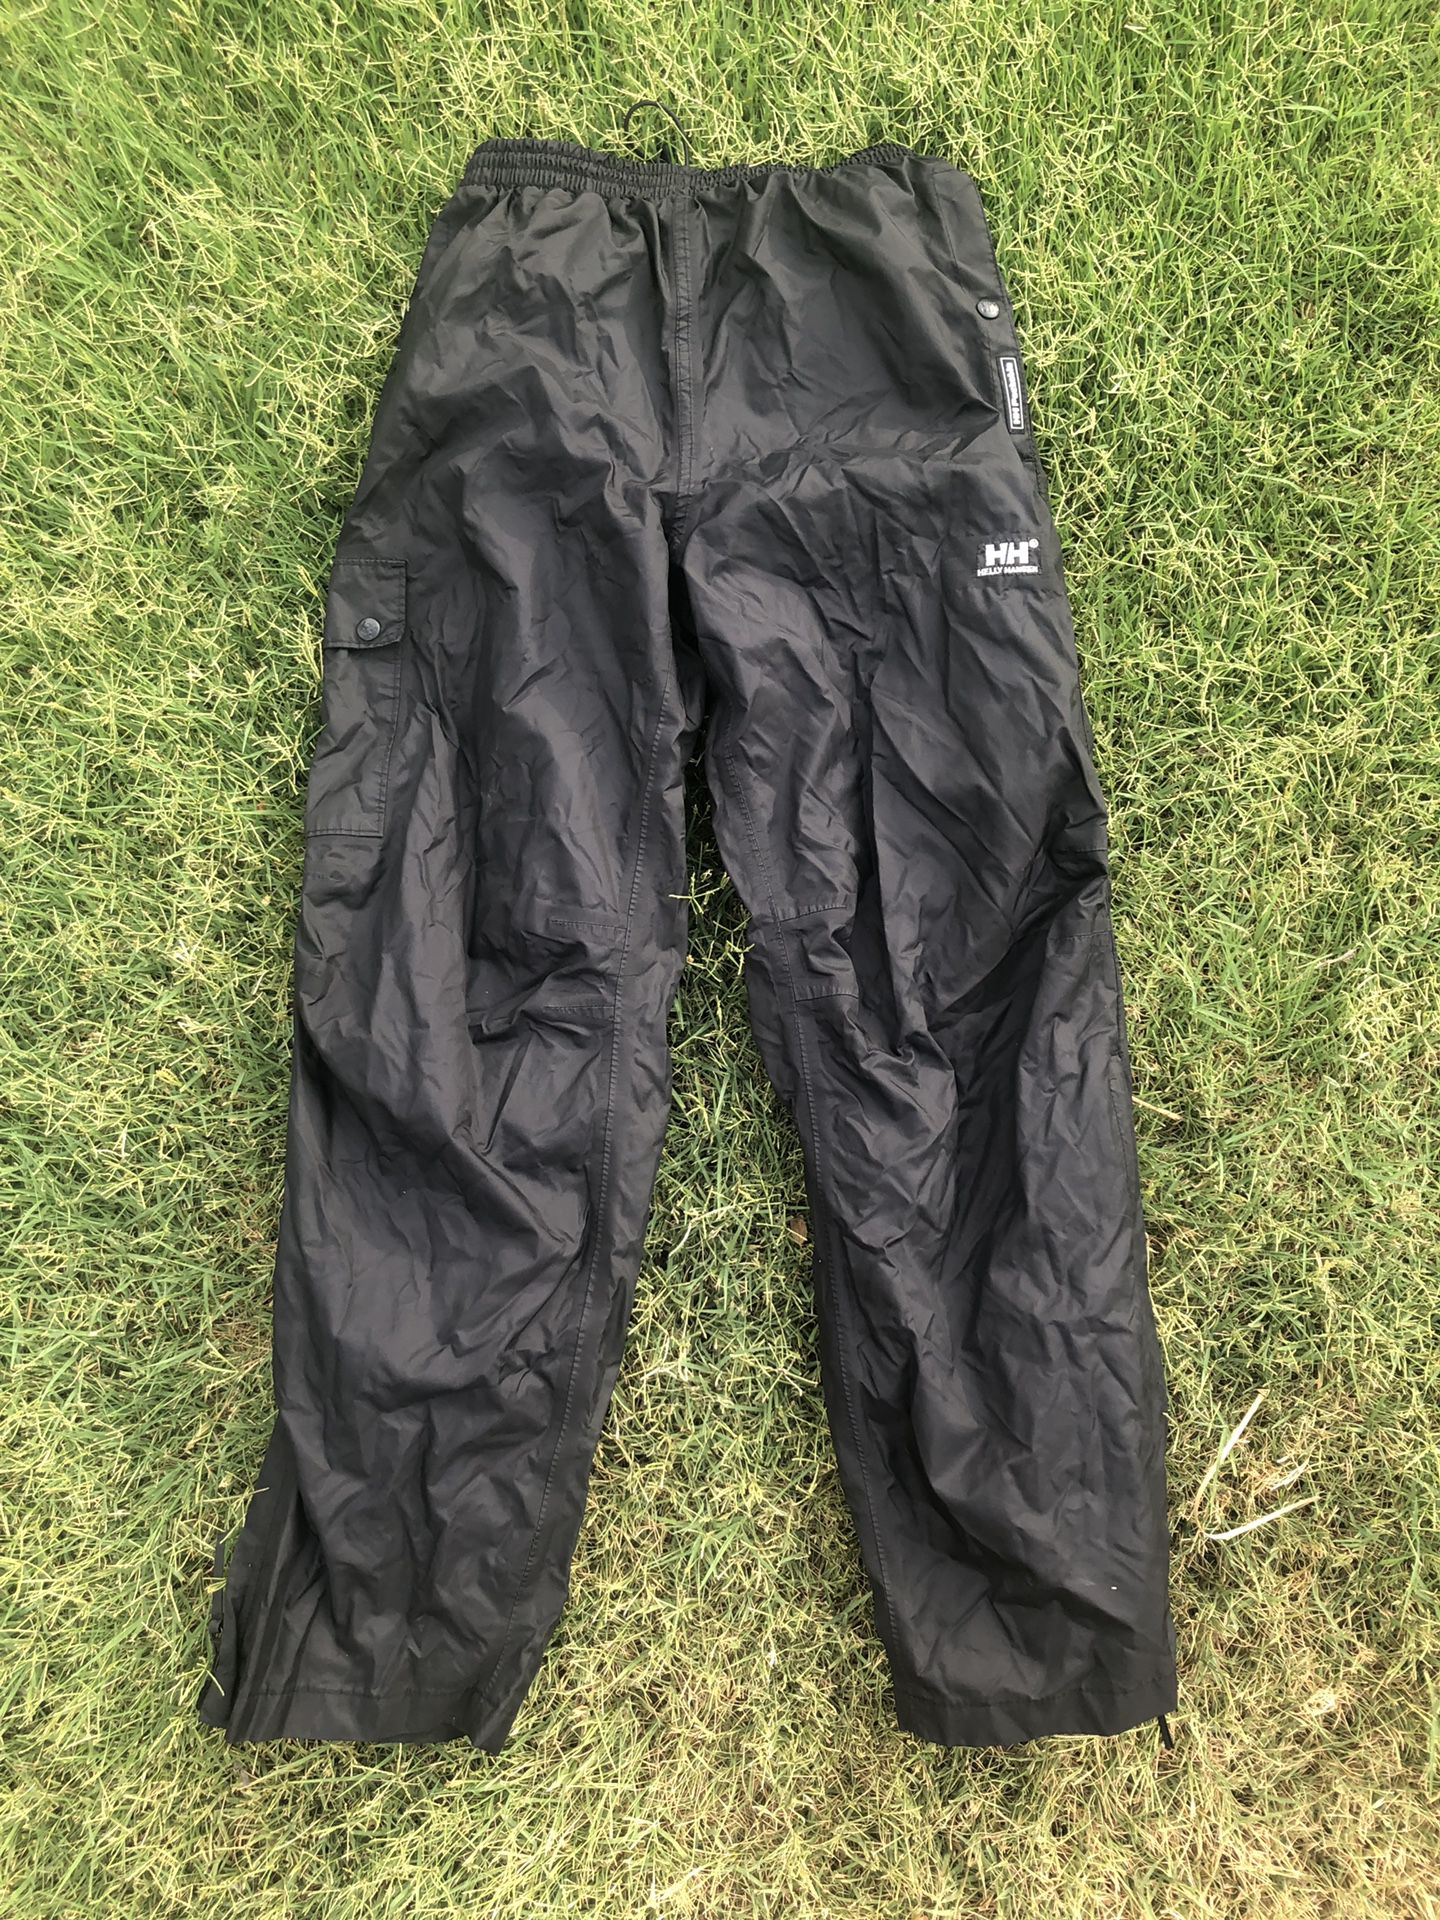 Helly Hansen Waterproof Packable Hiking Pants Men's Small NEW Condition!!!